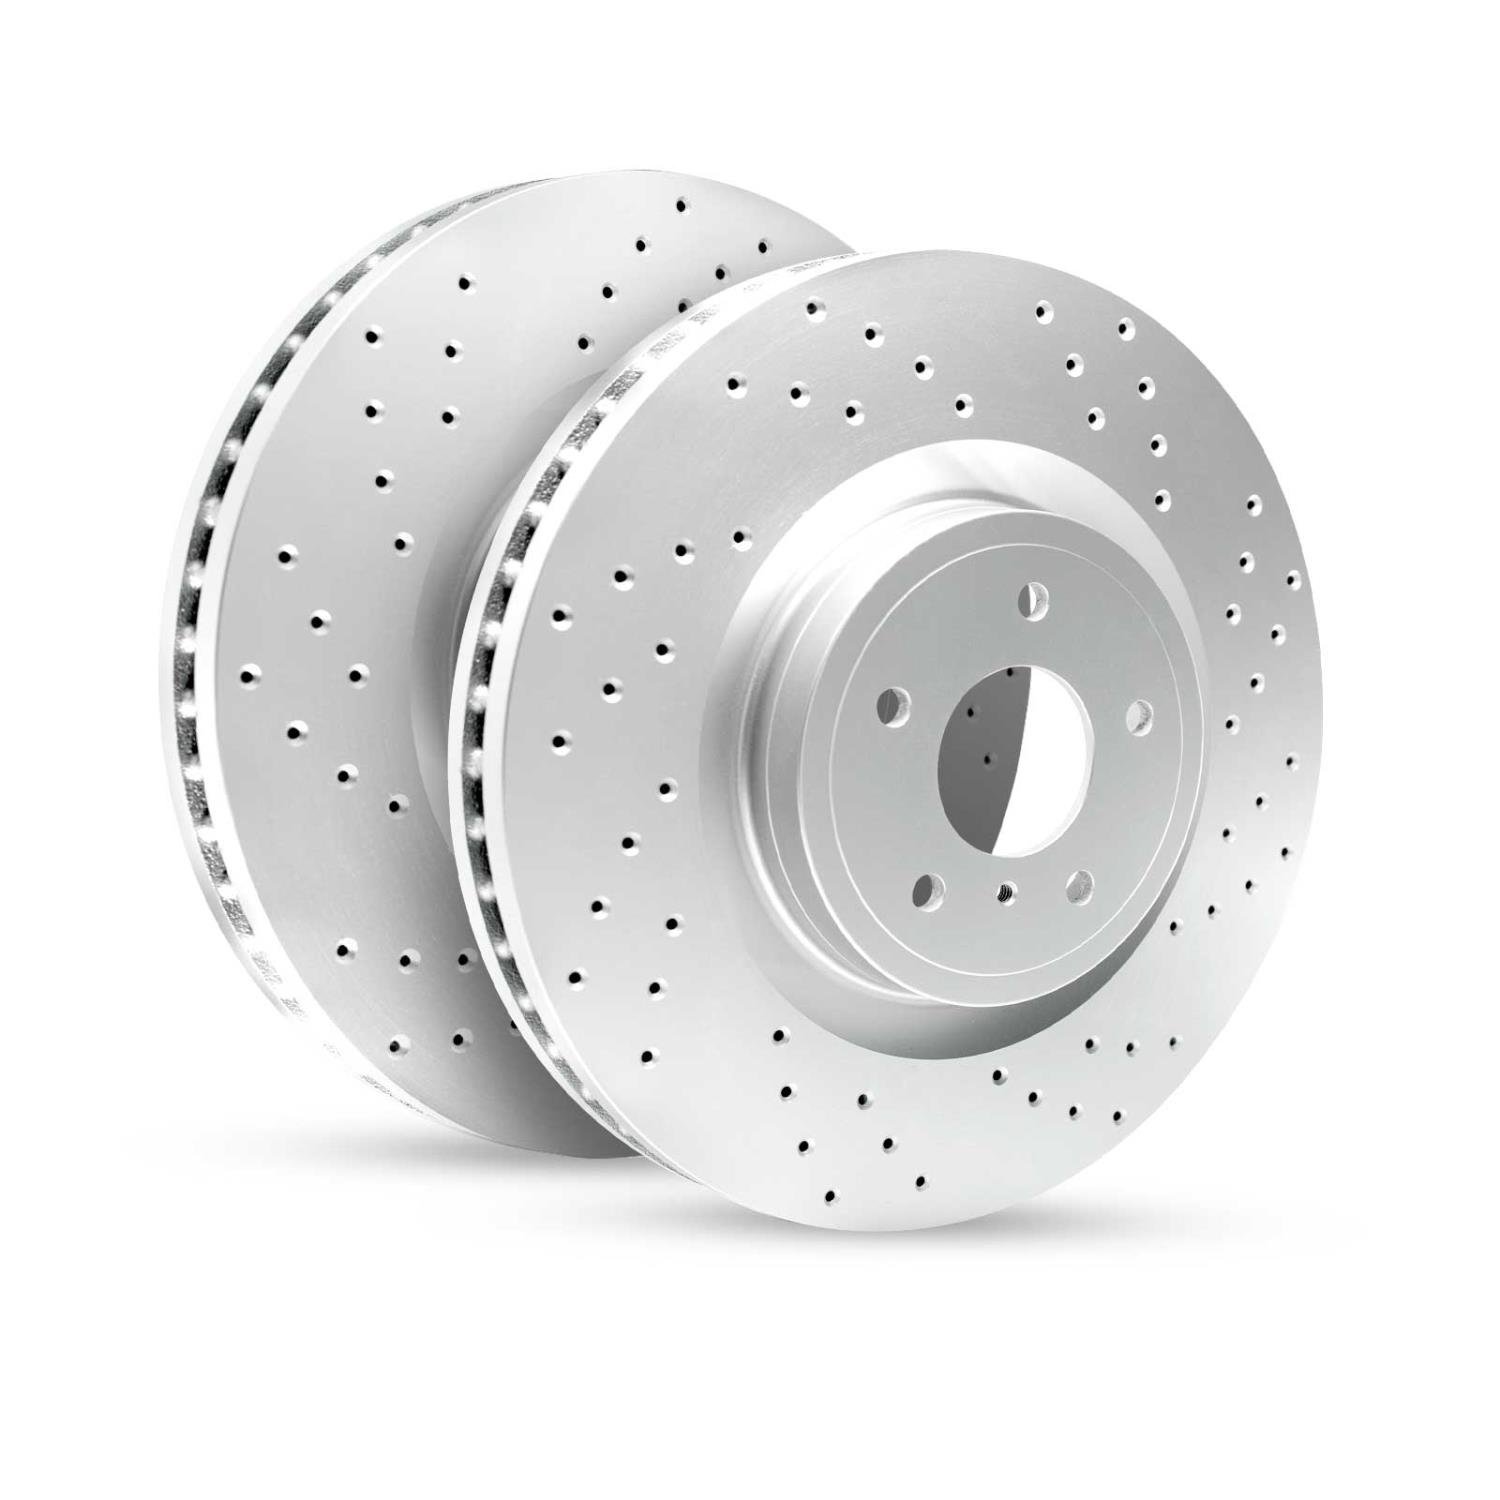 GEO-Carbon Drilled/Slotted Rotors, 2007-2014 Infiniti/Nissan,